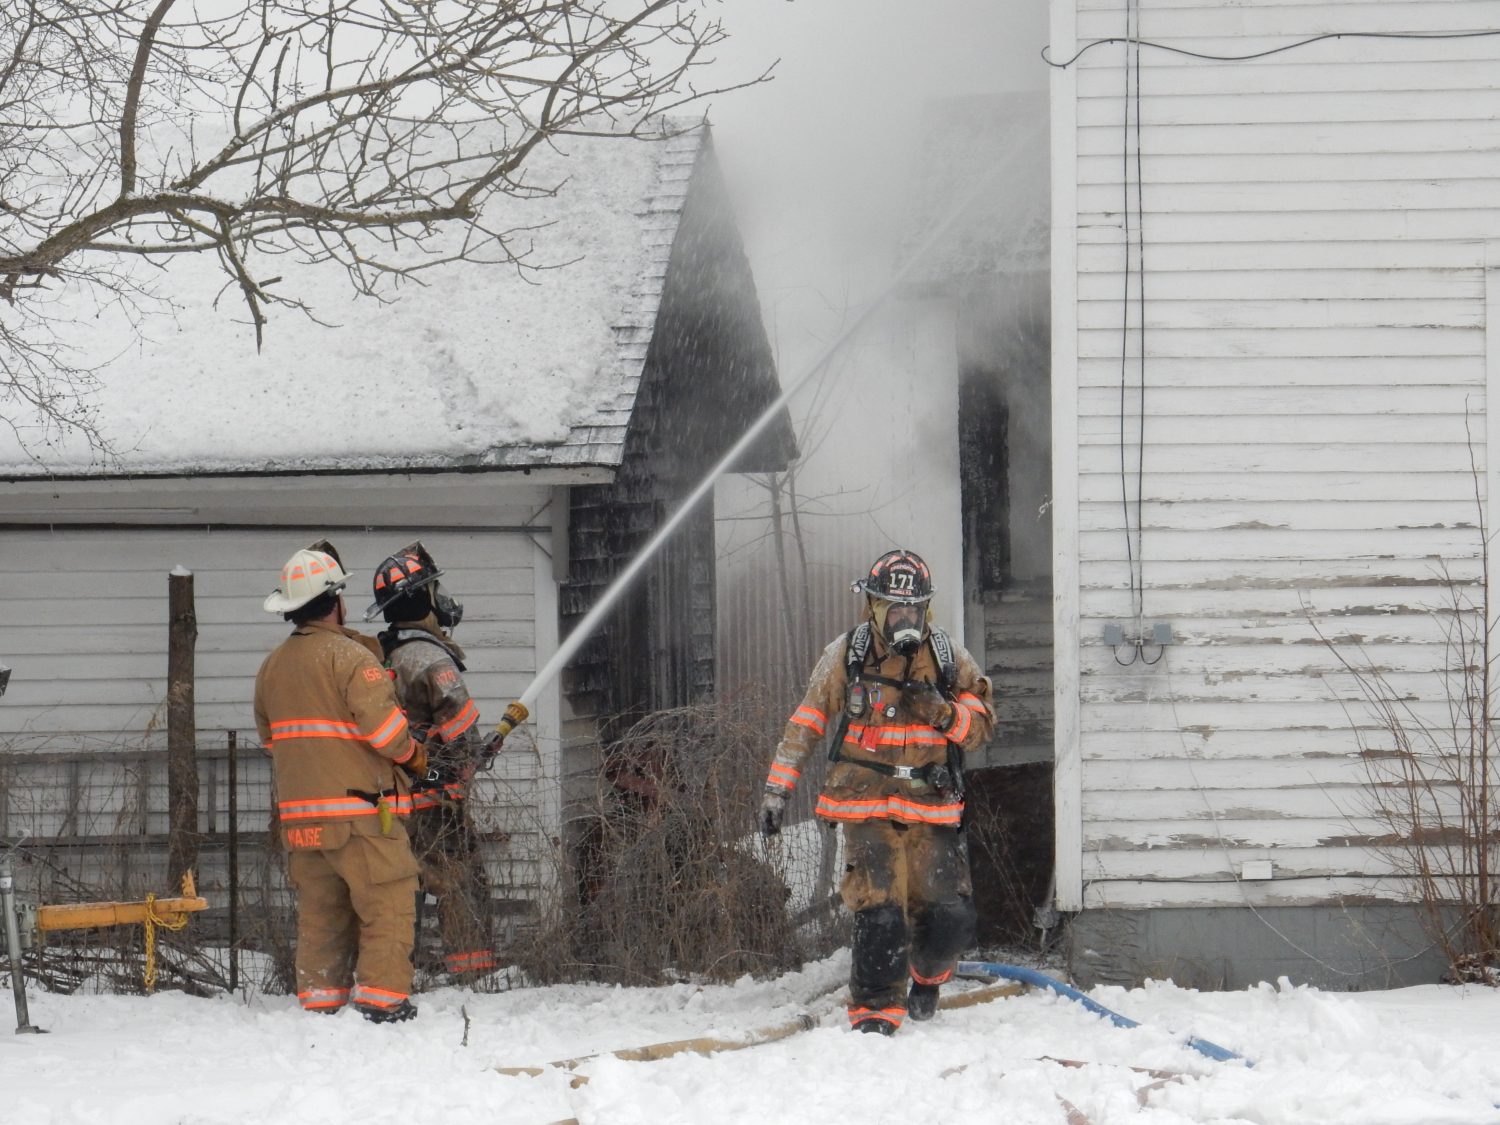 Details of house fire released